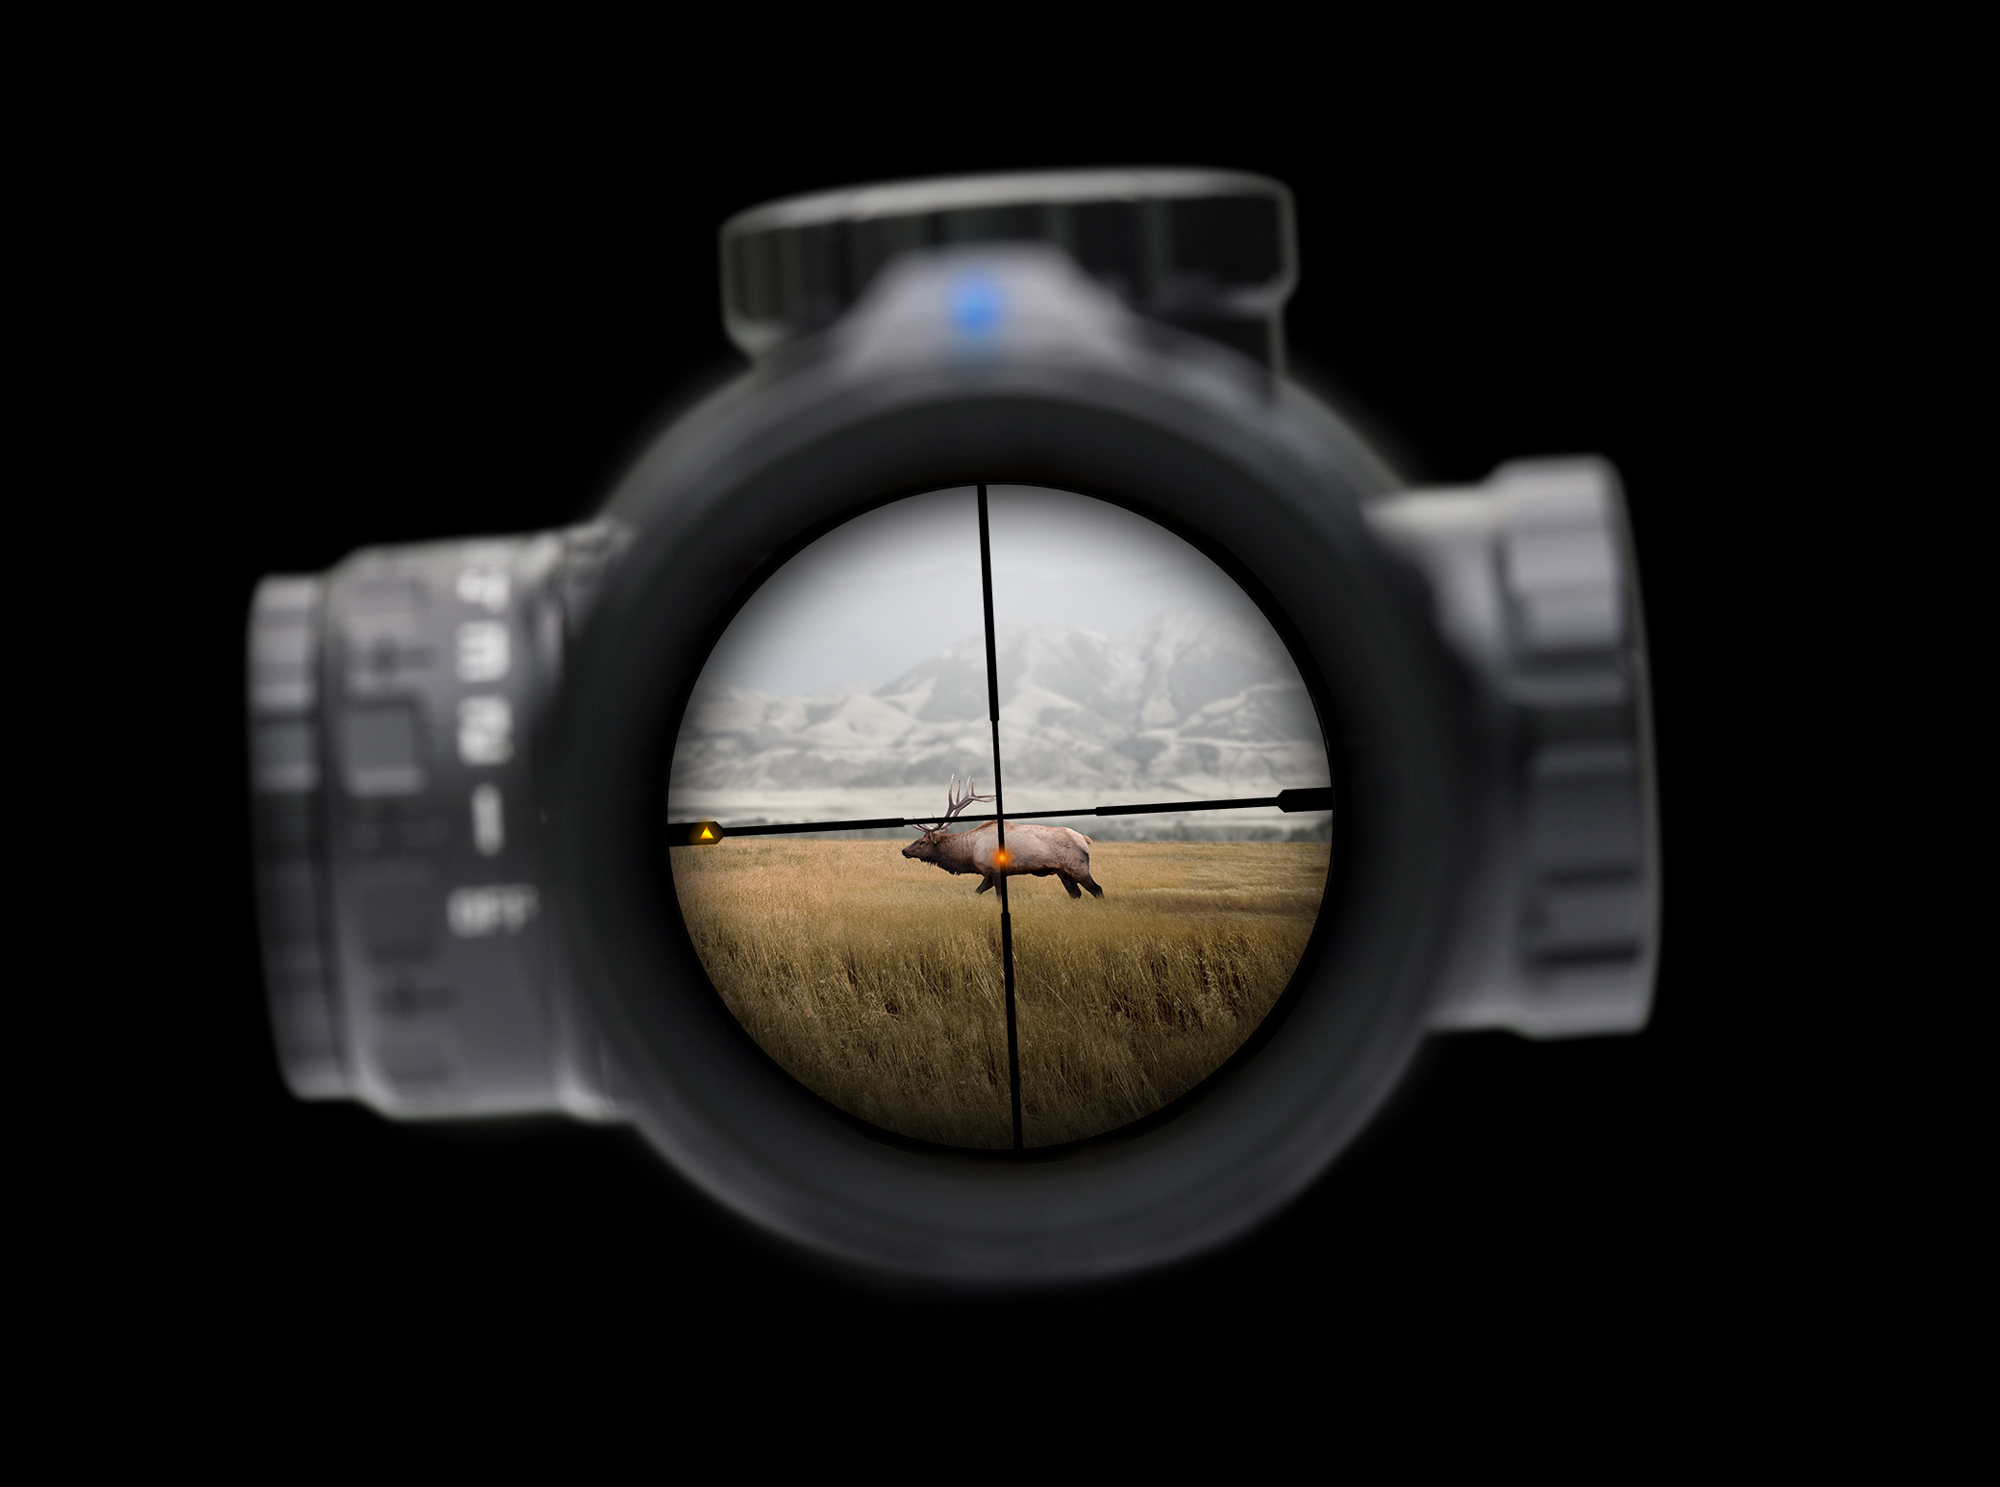 The Sig Sauer BDX riflescope showing the holdover dot